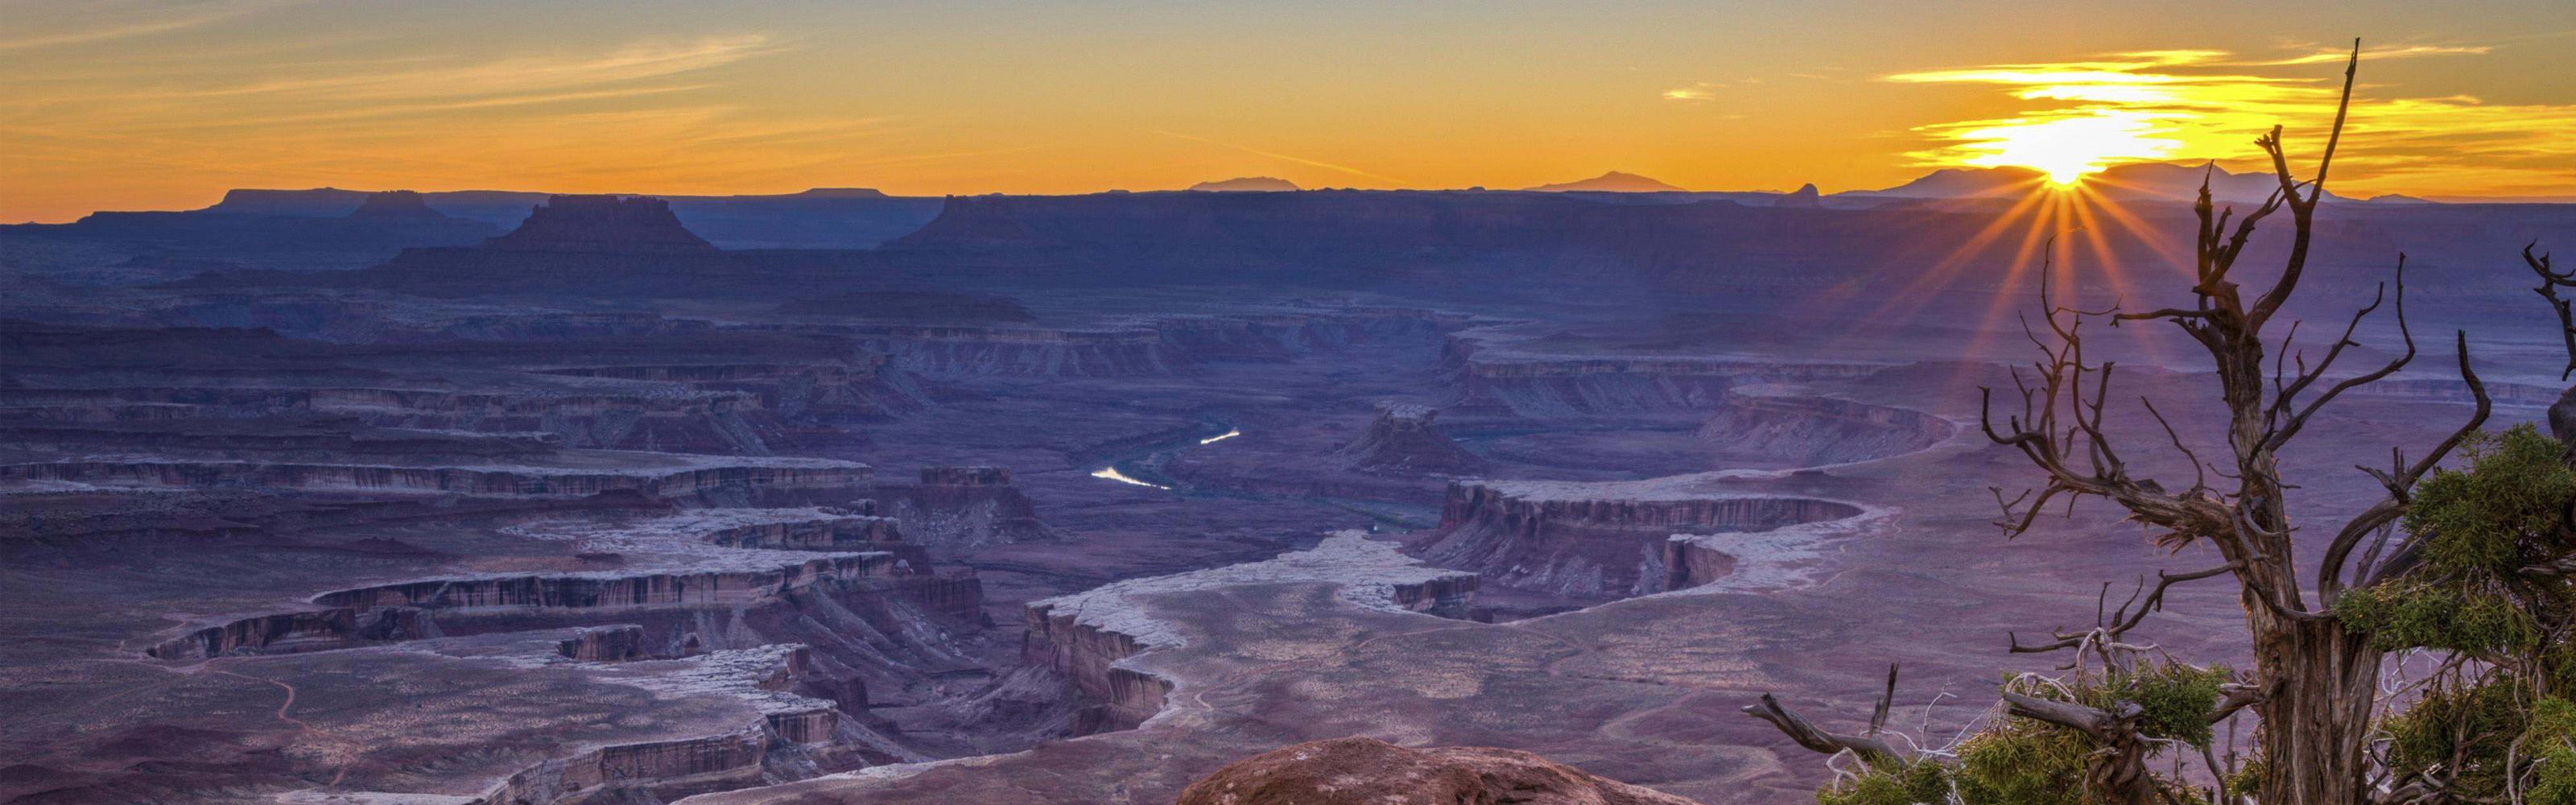 Setting sun over the Green River of Canyonlands National Park in Utah. © Mary Hulett/TNC Photo Contest 2019